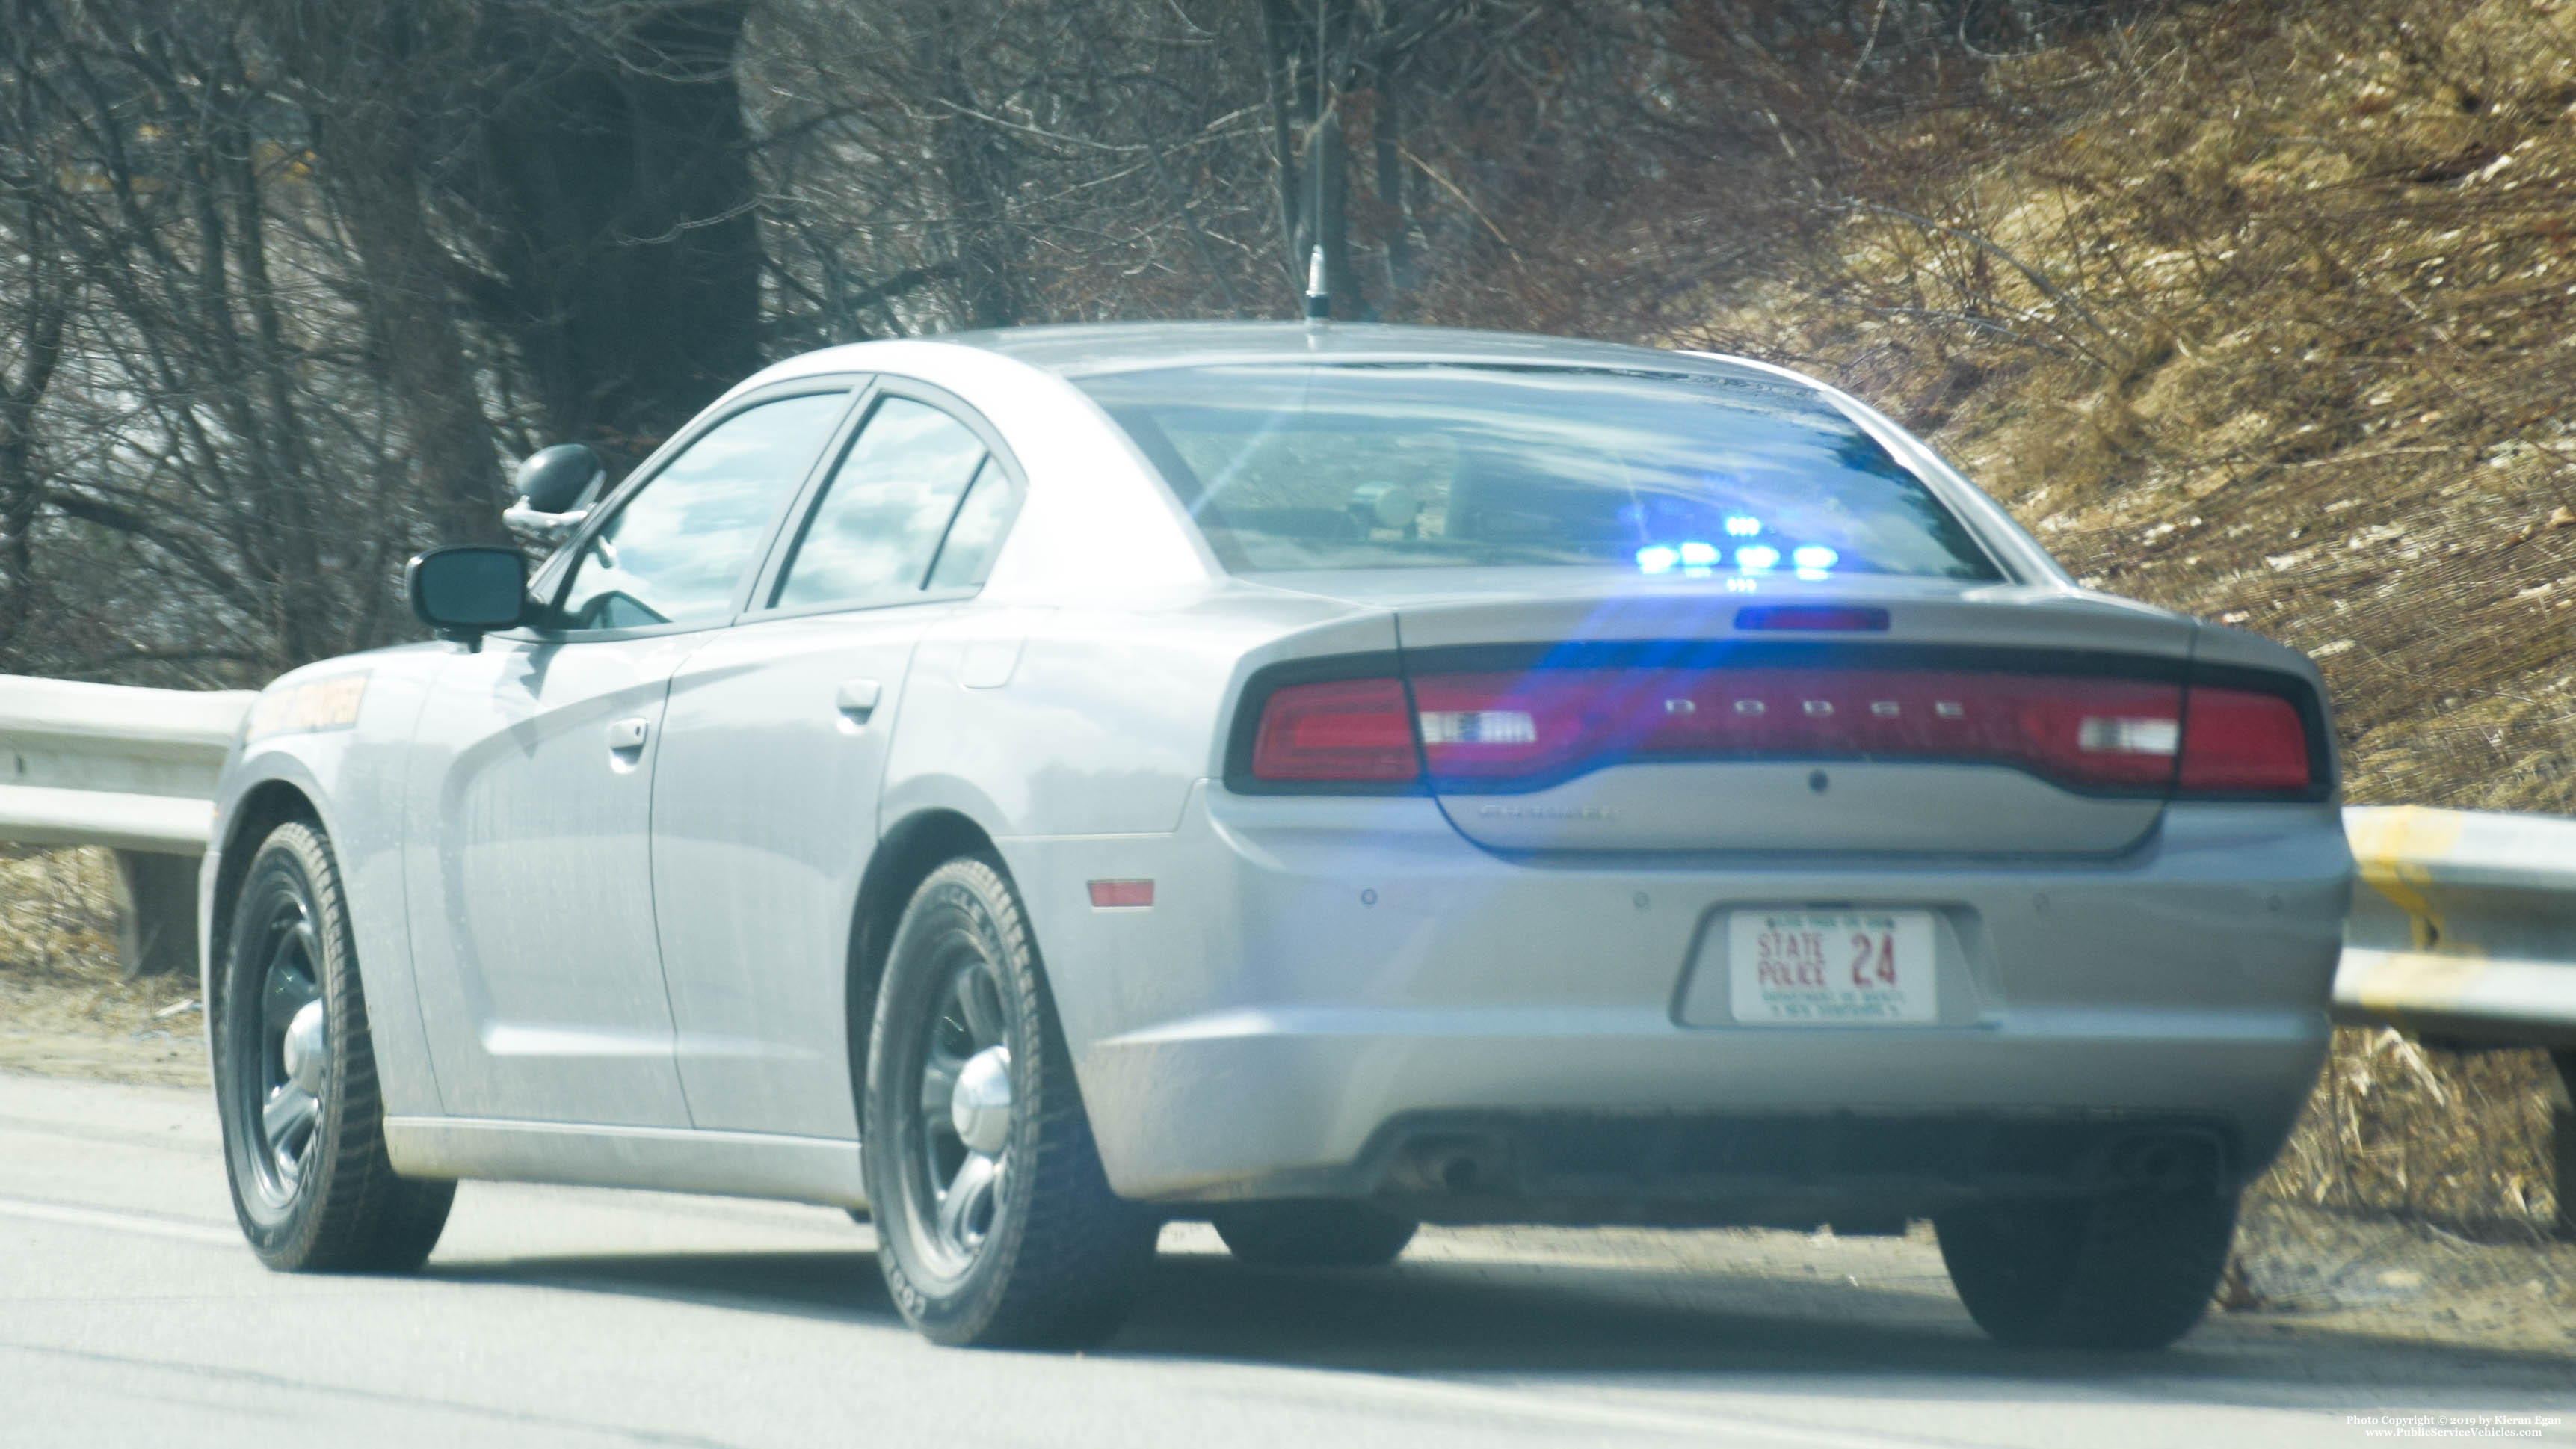 A photo  of New Hampshire State Police
            Cruiser 24, a 2011-2014 Dodge Charger             taken by Kieran Egan